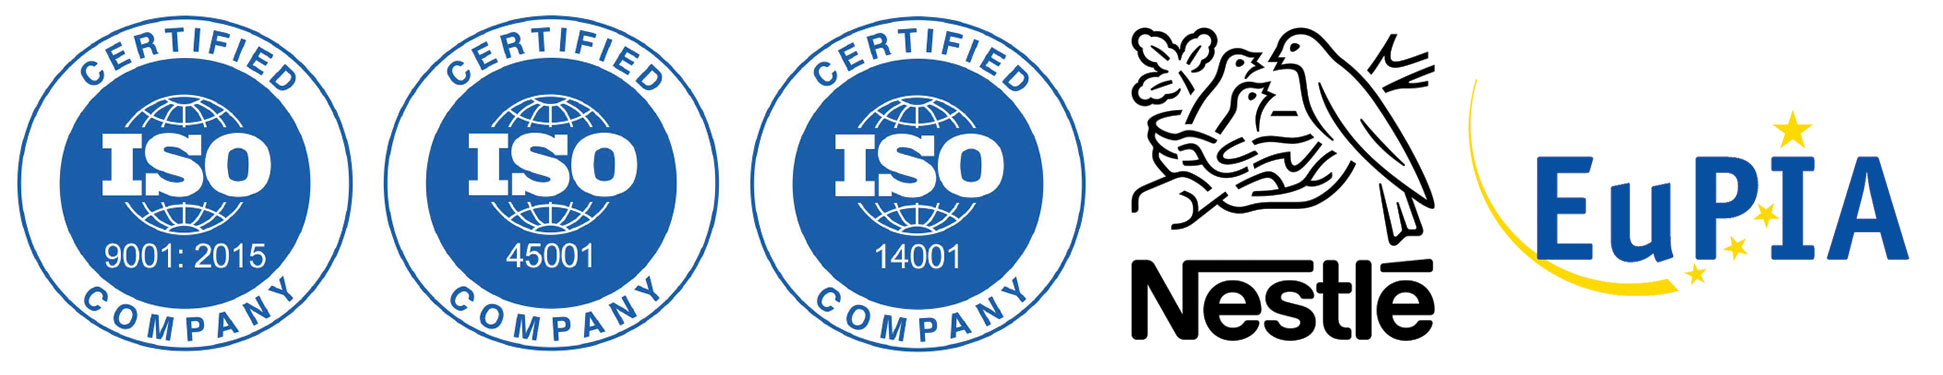 Impact Labelling Limerick are ISO 9001:2015 Certified